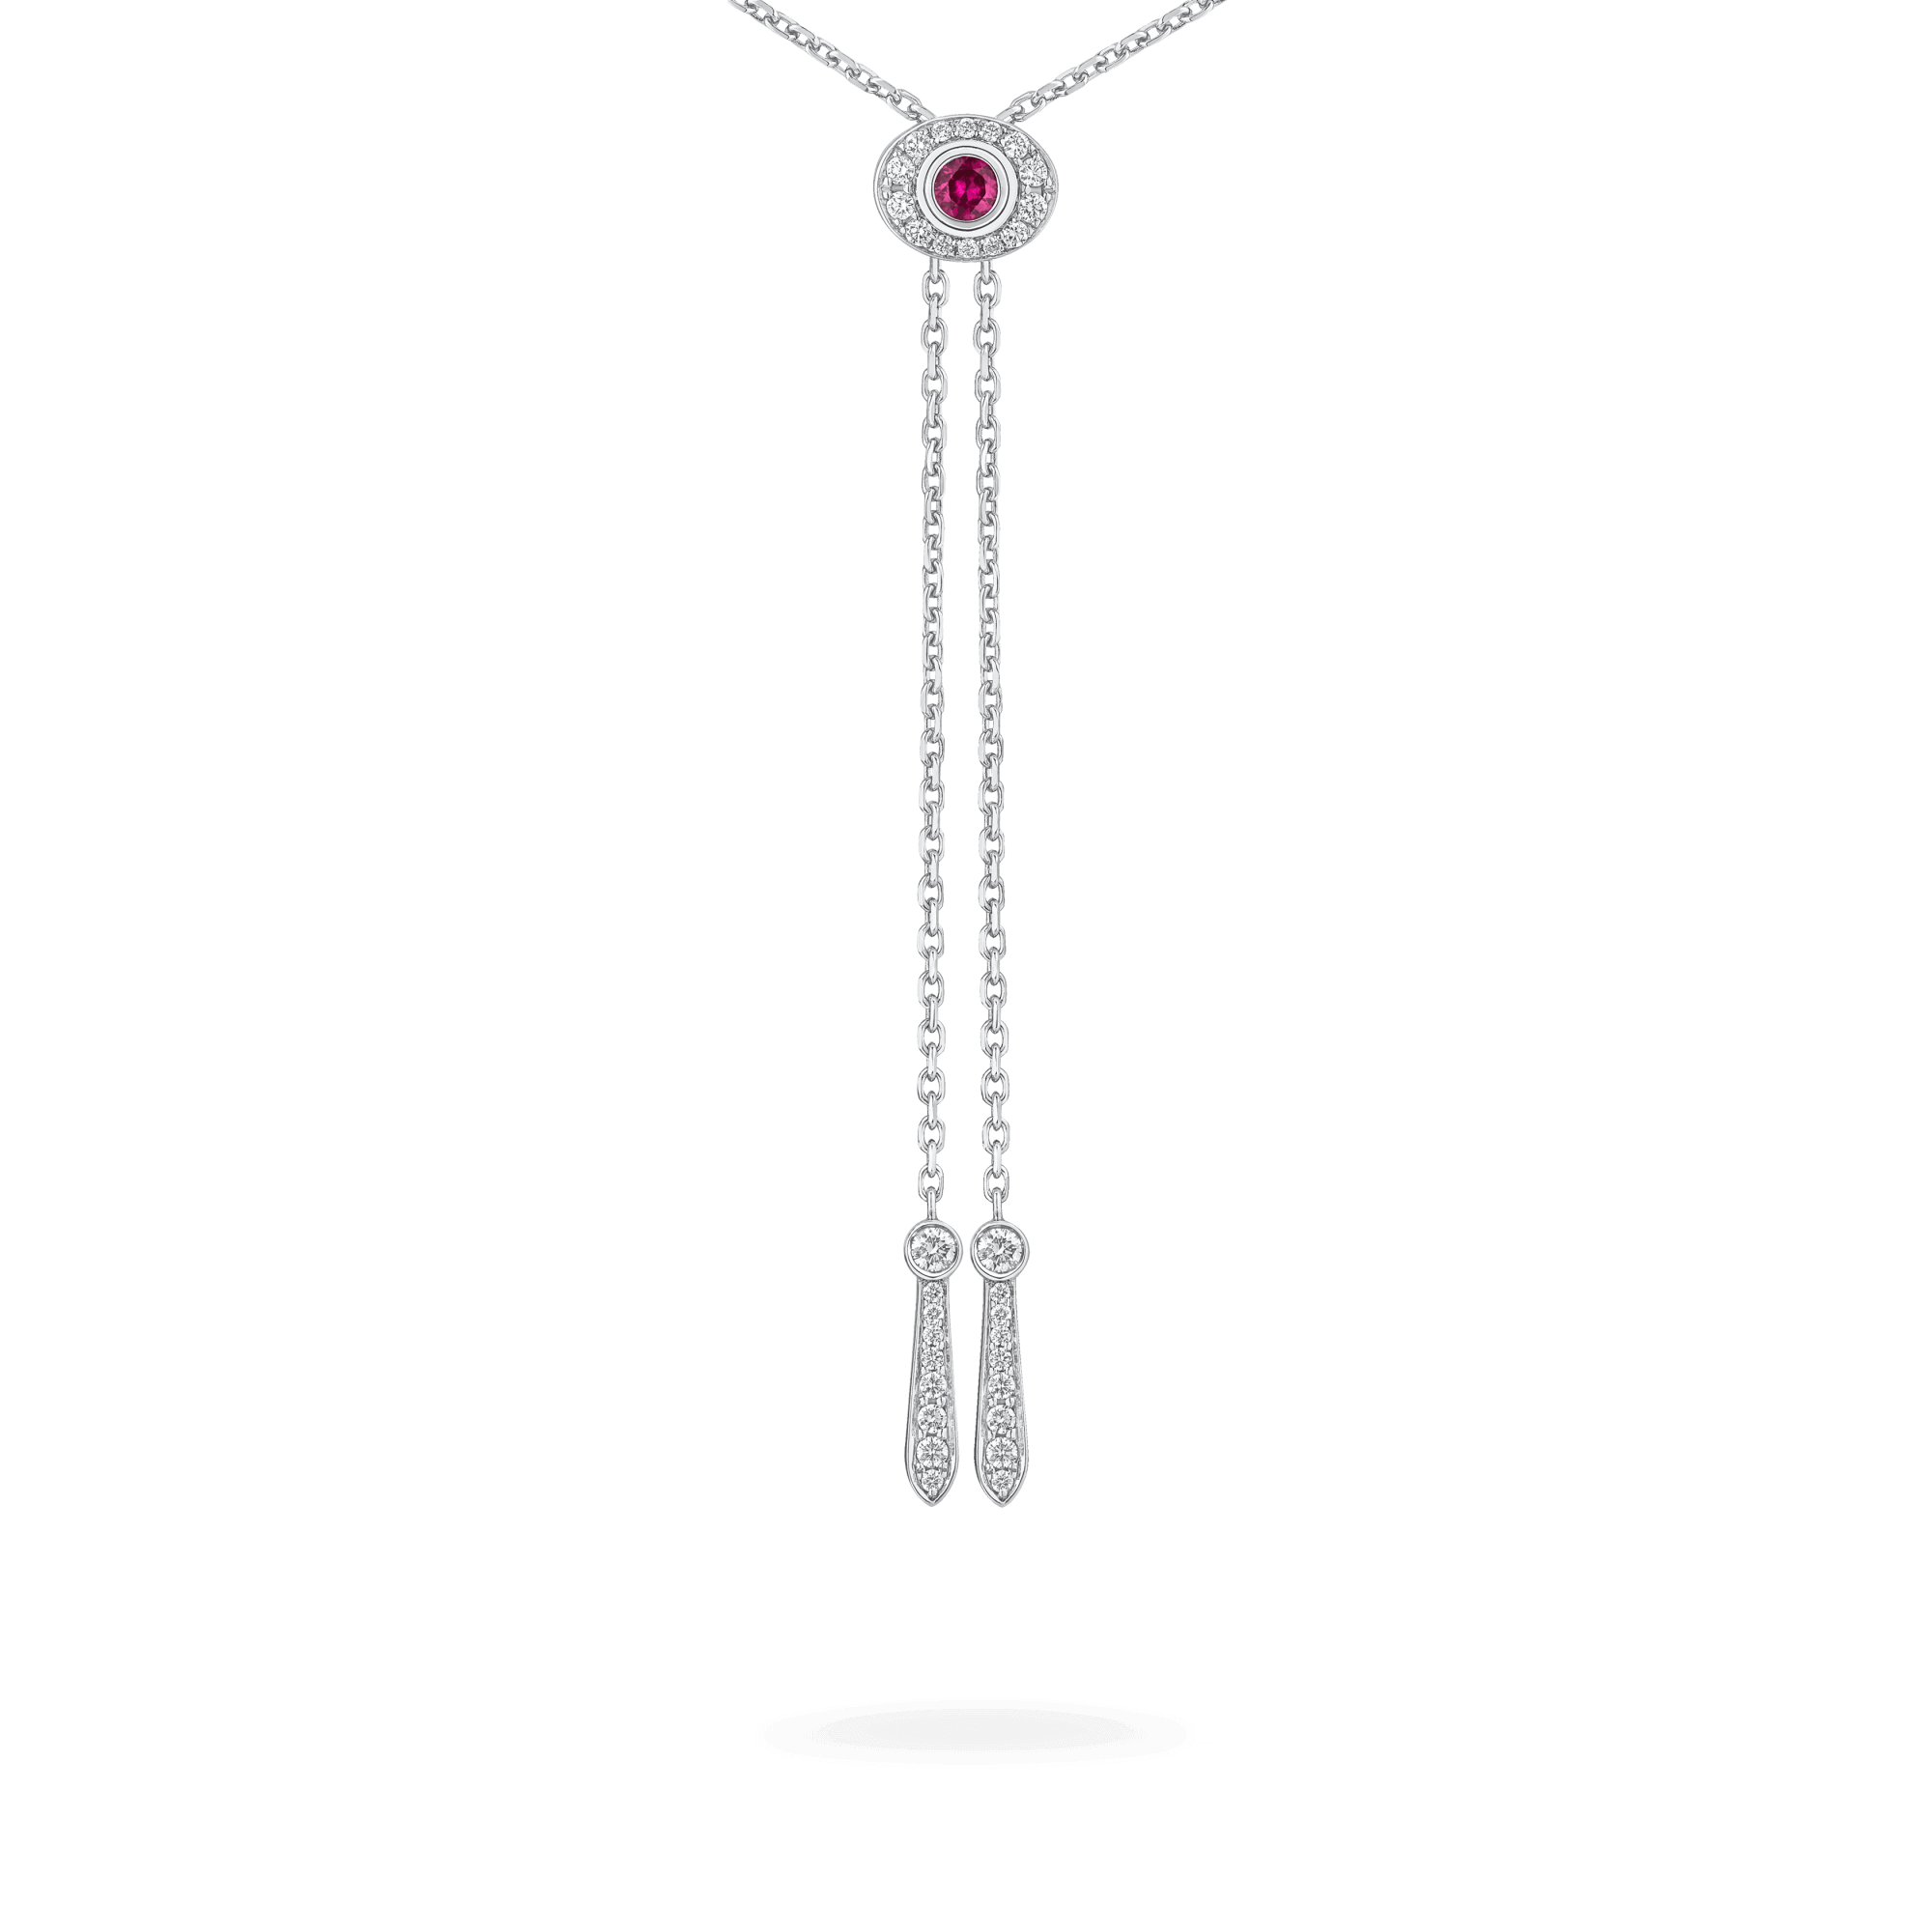 Garrard Wings Embrace collection Flamingo Slider Pendant In 18ct White Gold with Diamonds Rubies and Sapphires 2017604 Back